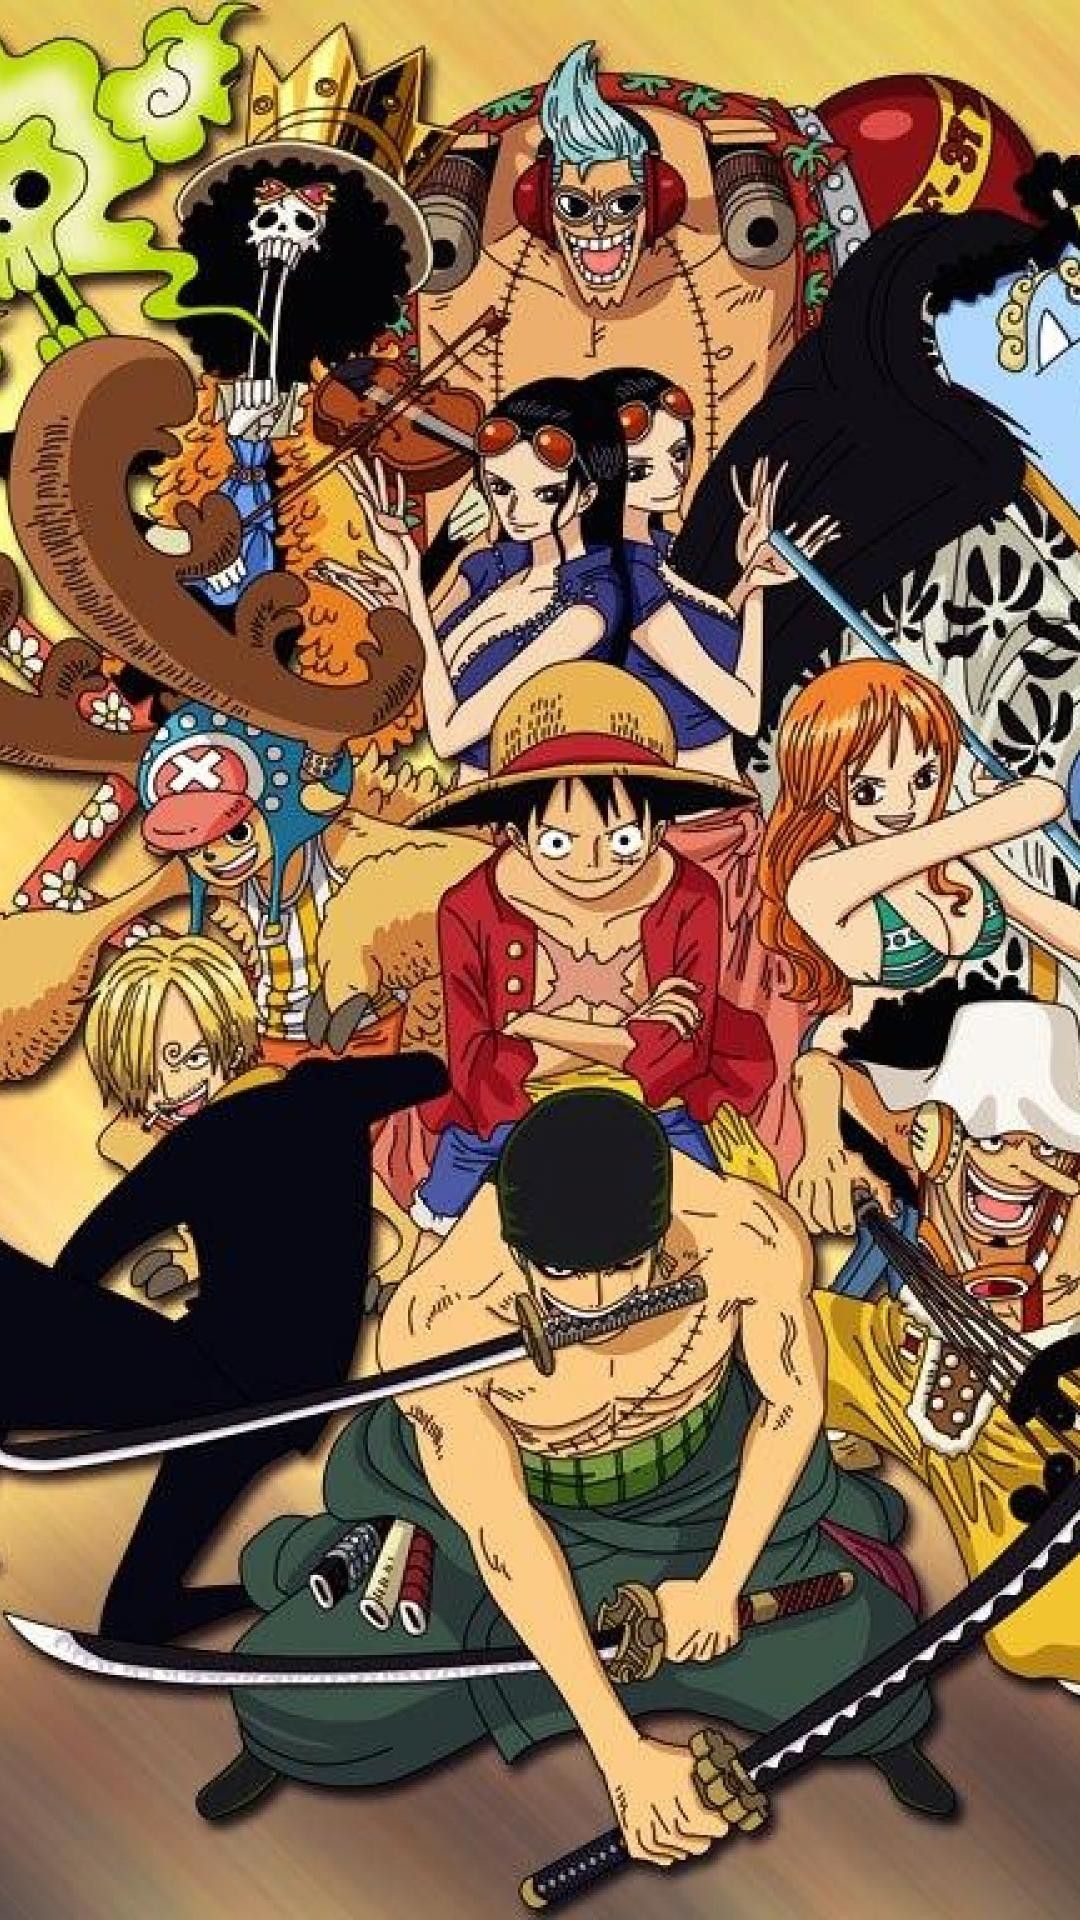 One Piece Iphone X Wallpapers Wallpaper Cave